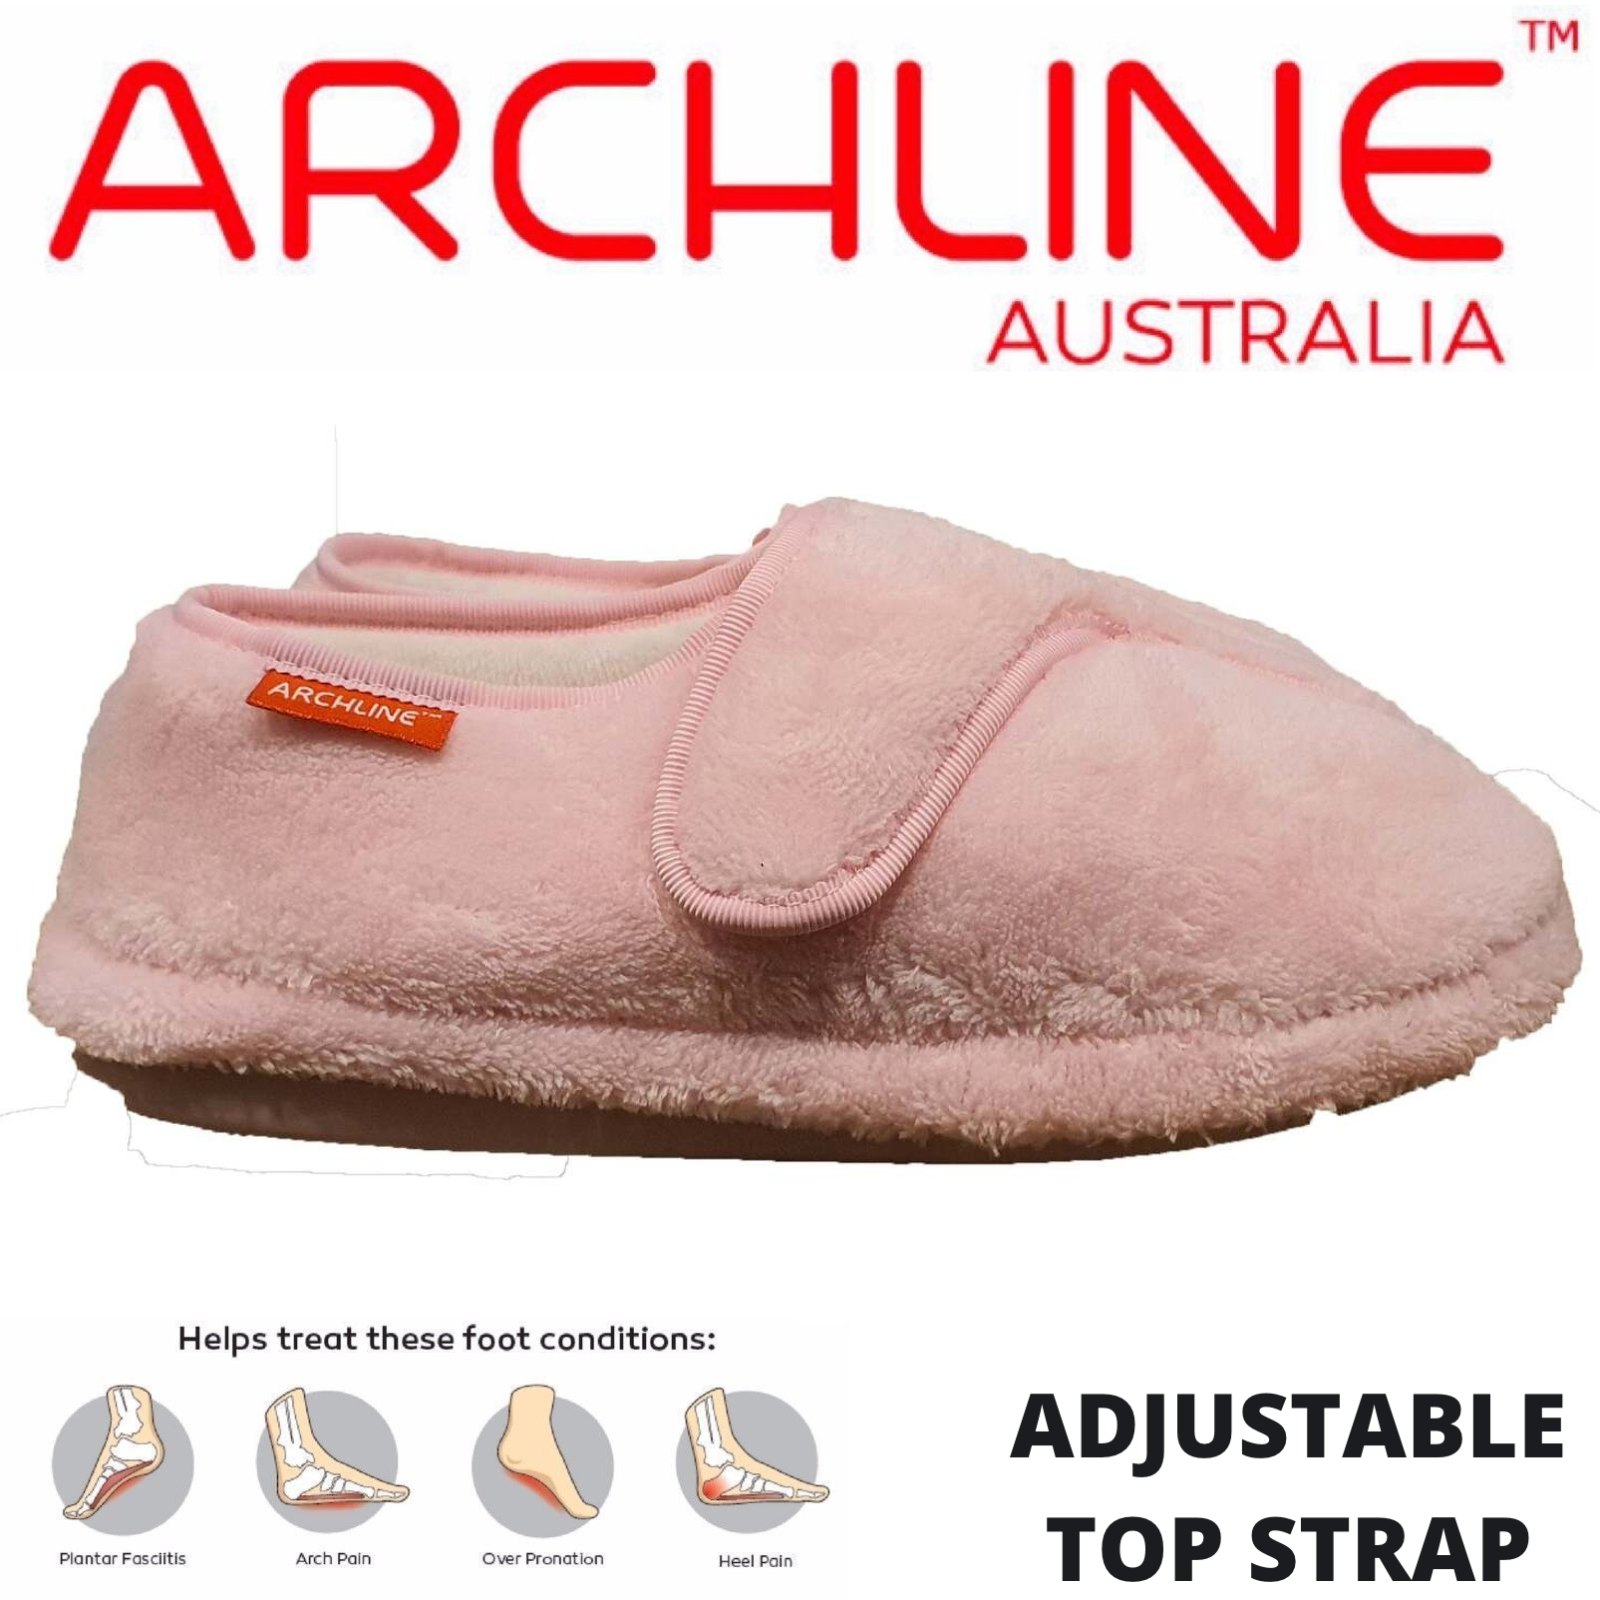 Orthotic Plus Slippers Closed Scuffs Pain Relief Moccasins - Pink - EU 39